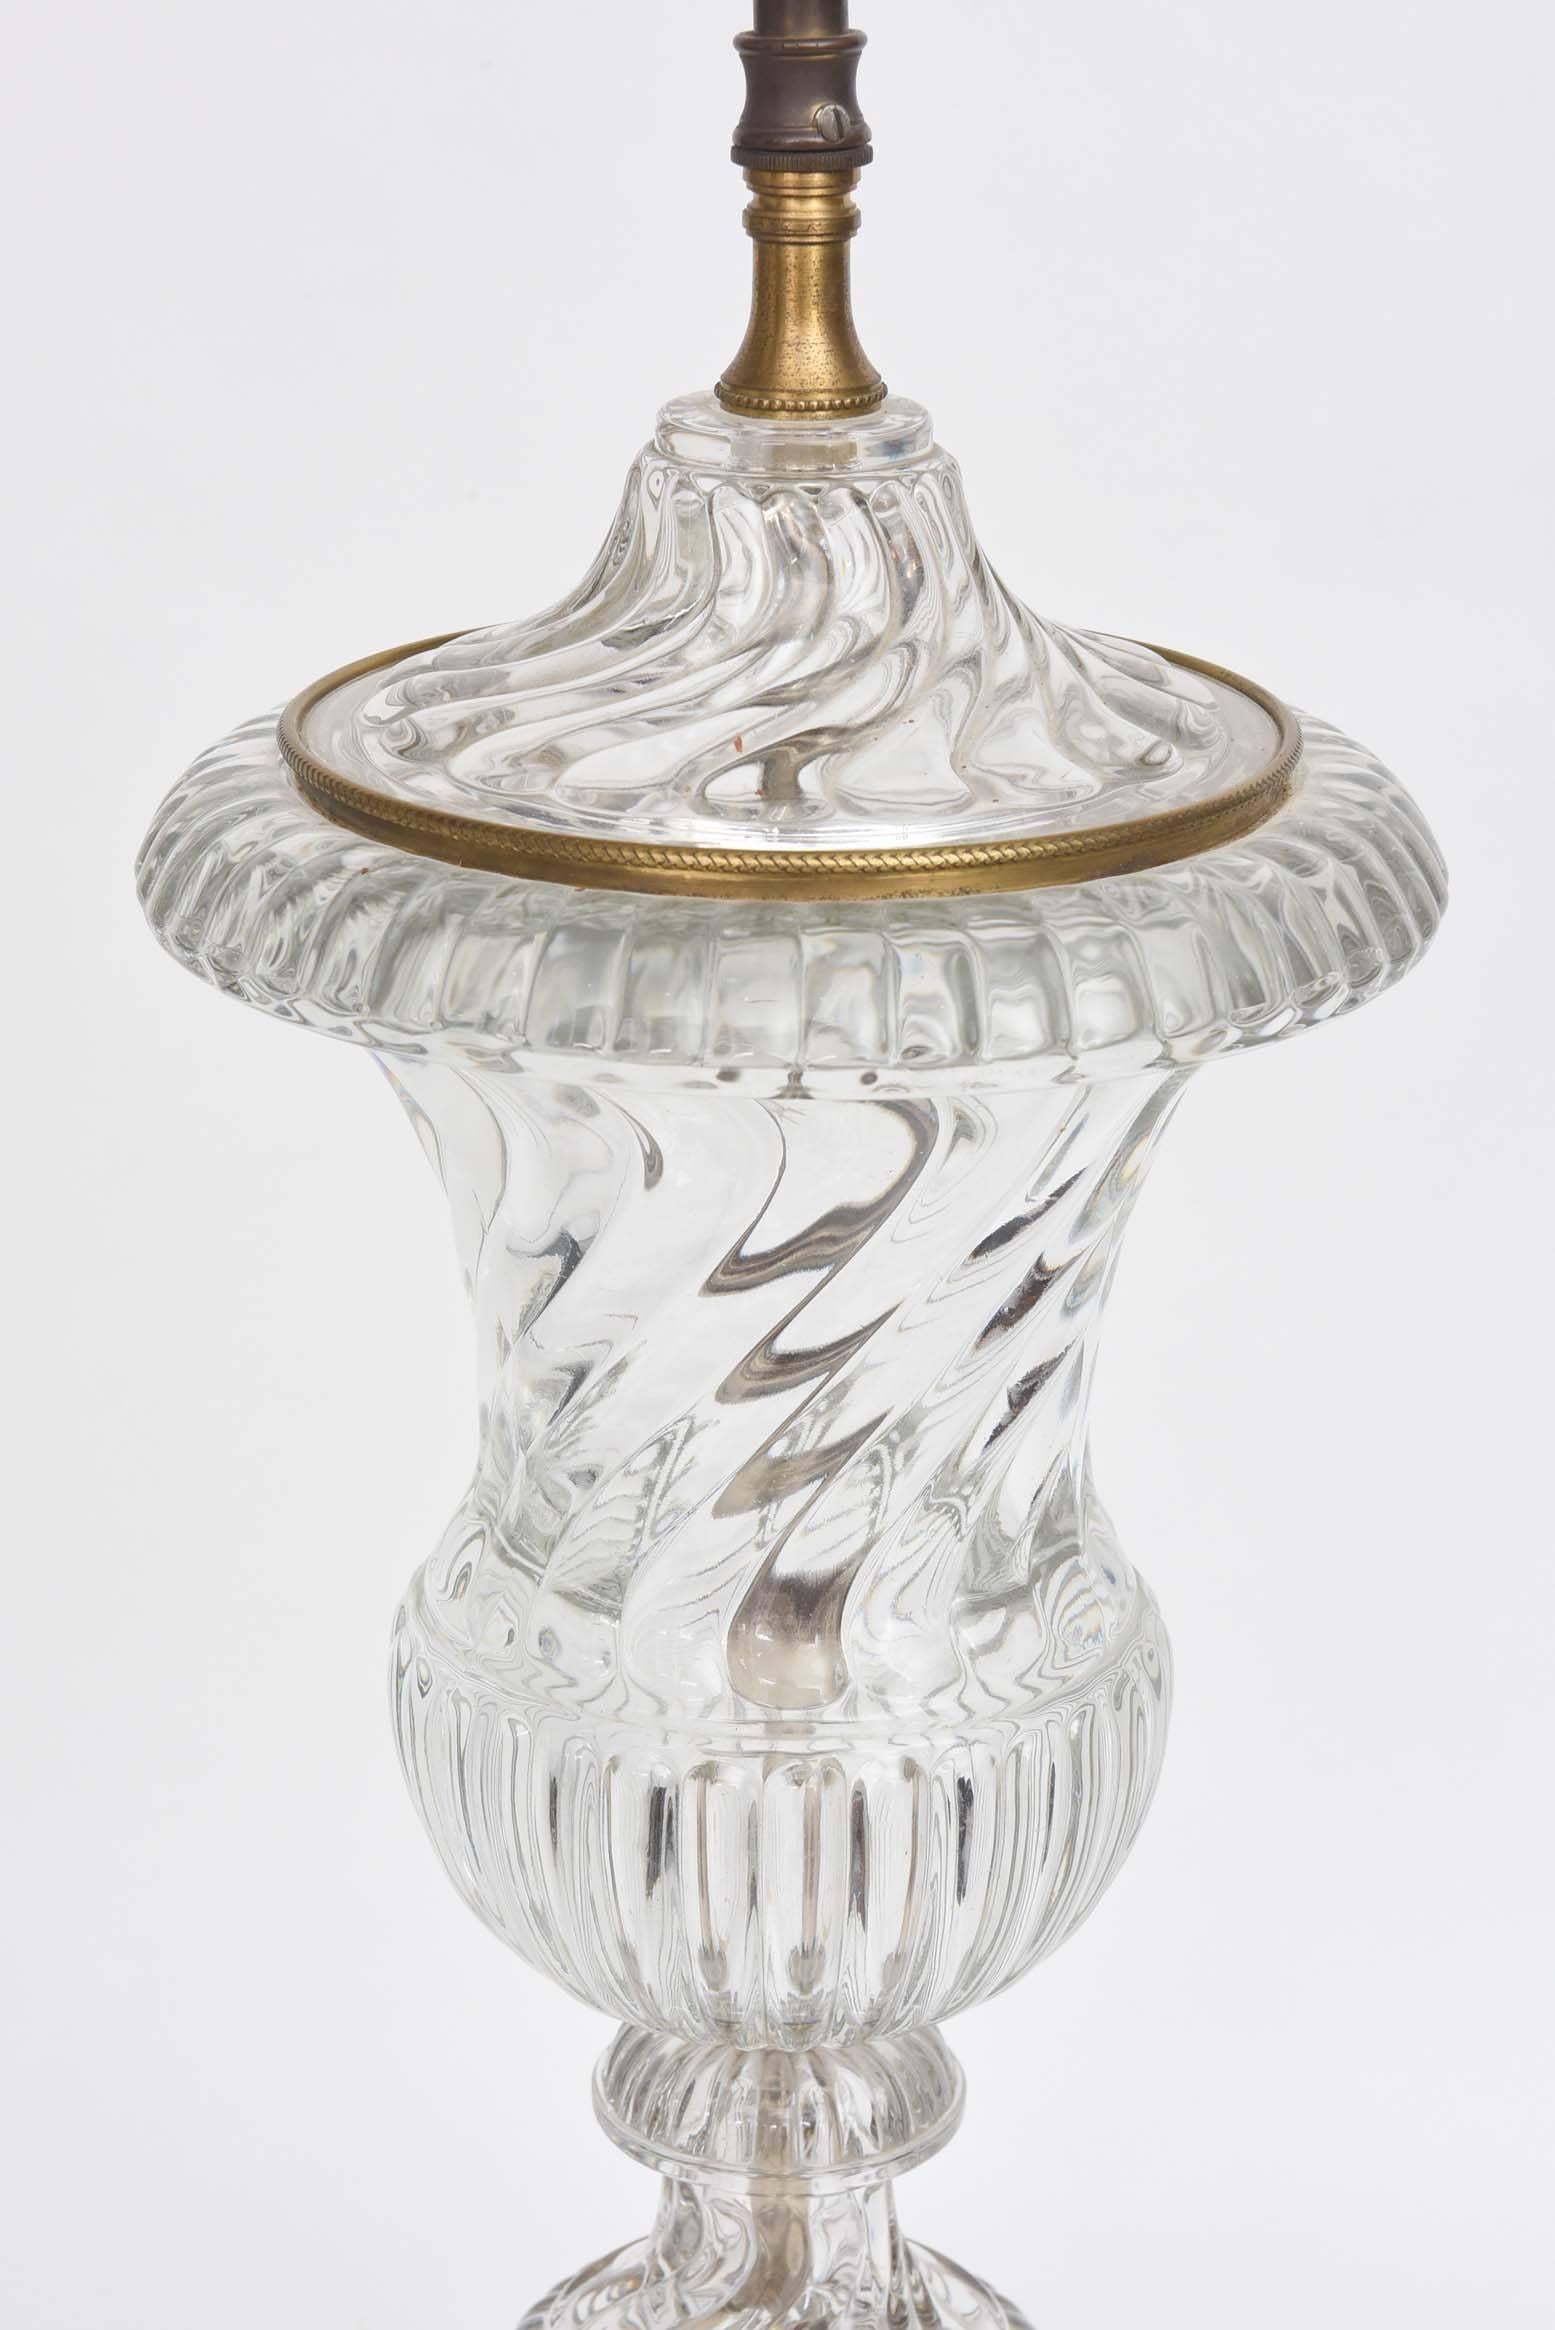 Hand-Crafted Baccarat Lamp with Ormolu Mounts, Marble Base Tall and Elegant